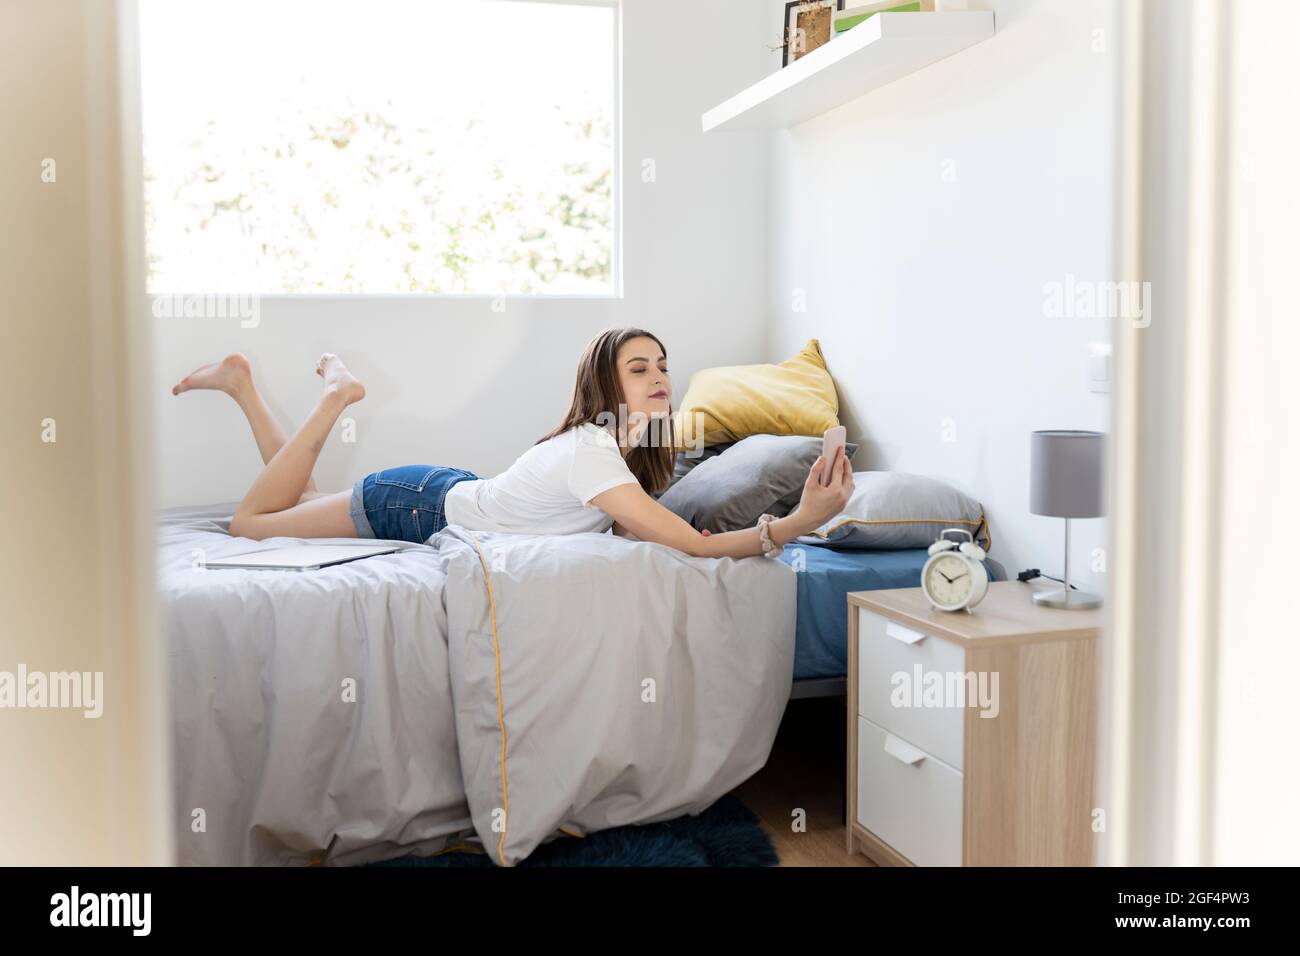 Woman taking selfie through smart phone while lying on bed at home Stock Photo